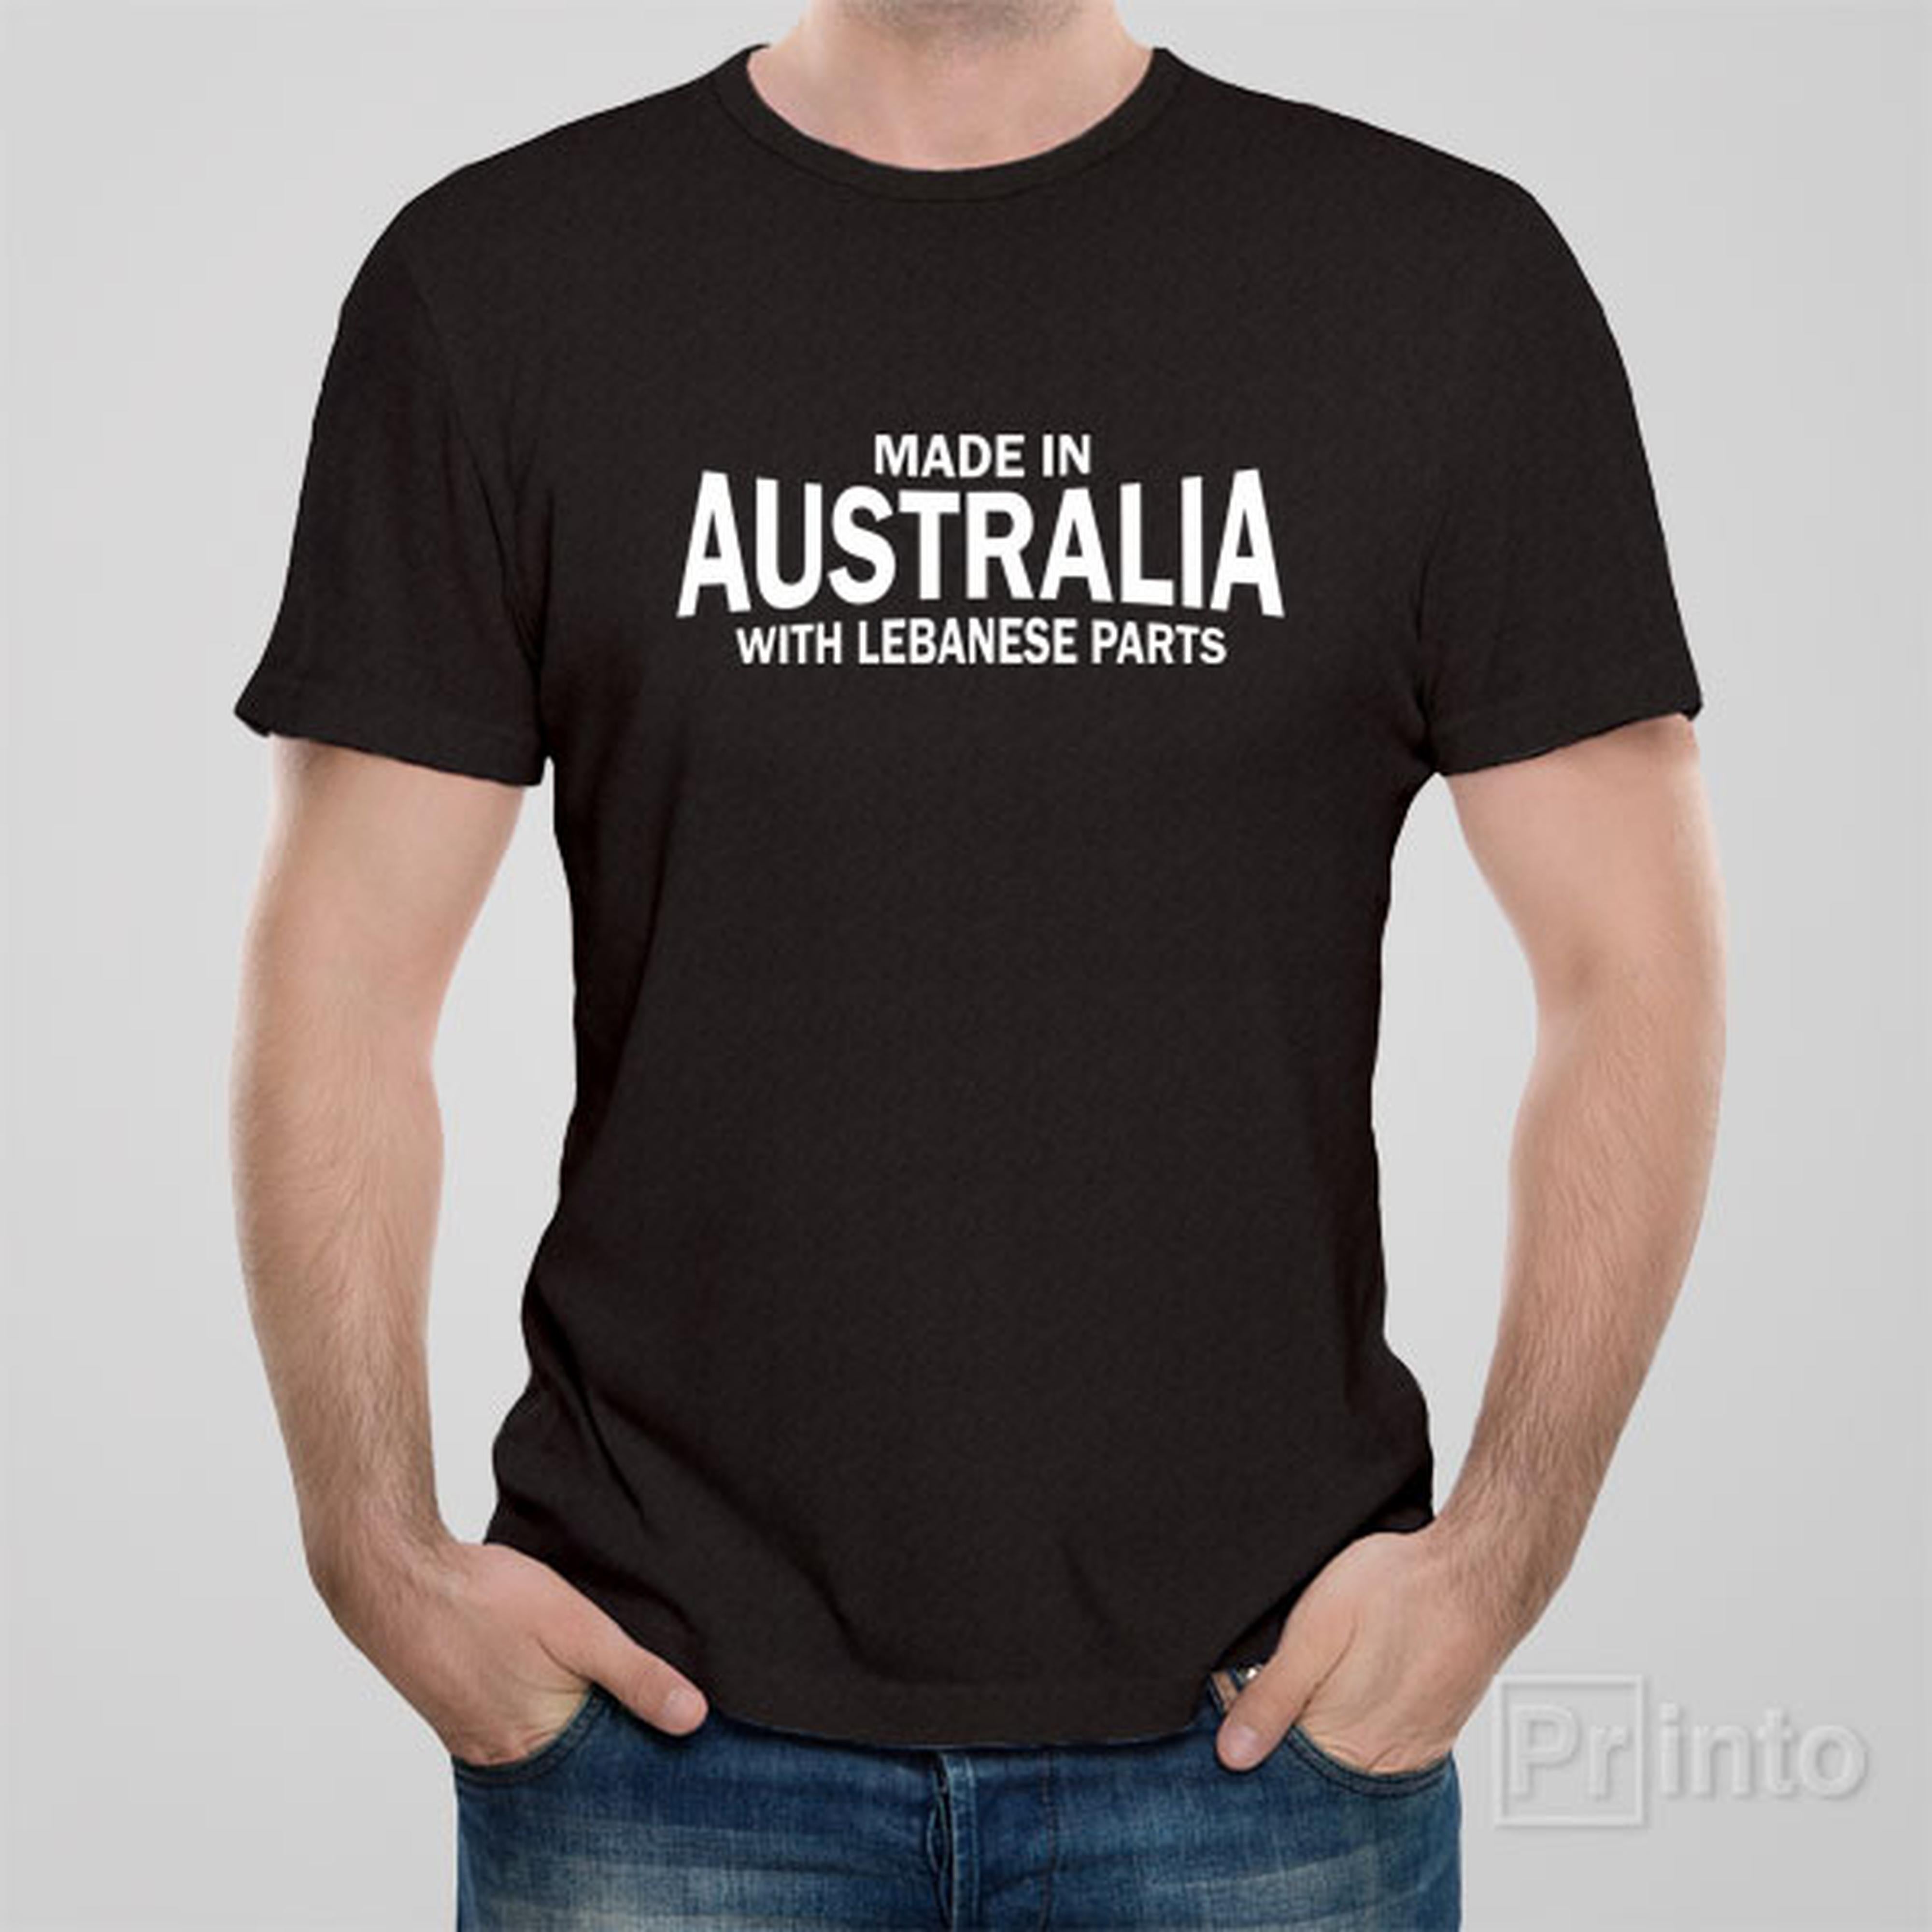 made-in-australia-with-lebanese-parts-t-shirt